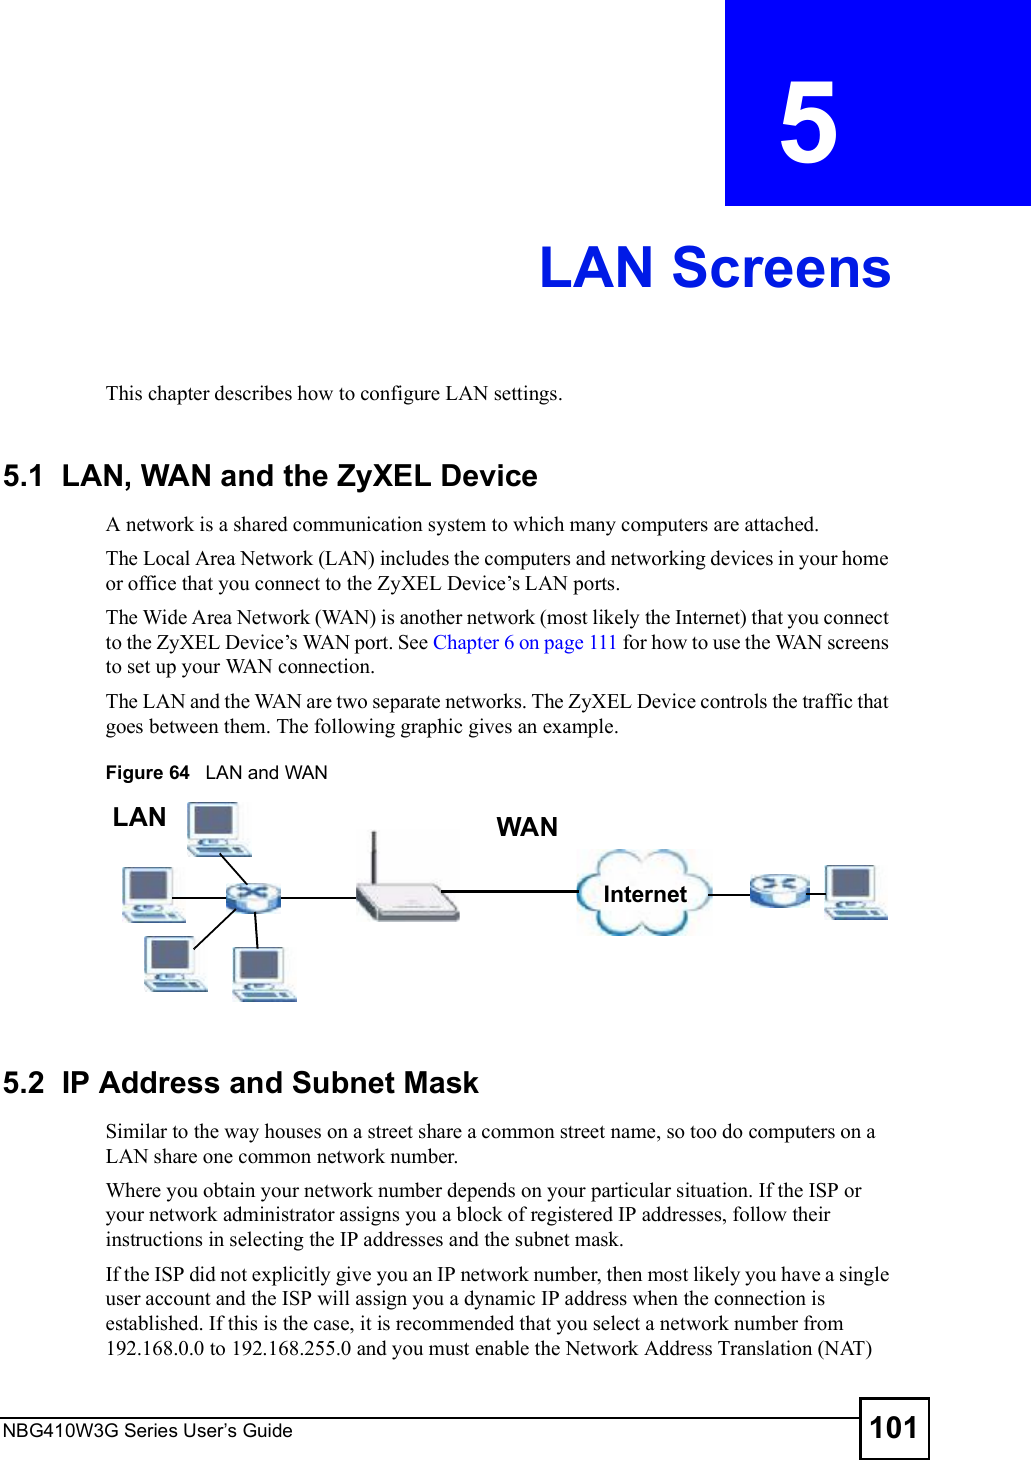 NBG410W3G Series User s Guide 101CHAPTER  5 LAN ScreensThis chapter describes how to configure LAN settings.5.1  LAN, WAN and the ZyXEL DeviceA network is a shared communication system to which many computers are attached. The Local Area Network (LAN) includes the computers and networking devices in your home or office that you connect to the ZyXEL Device!s LAN ports.  The Wide Area Network (WAN) is another network (most likely the Internet) that you connect to the ZyXEL Device!s WAN port. See Chapter 6 on page 111 for how to use the WAN screens to set up your WAN connection. The LAN and the WAN are two separate networks. The ZyXEL Device controls the traffic that goes between them. The following graphic gives an example. Figure 64   LAN and WAN 5.2  IP Address and Subnet MaskSimilar to the way houses on a street share a common street name, so too do computers on a LAN share one common network number.Where you obtain your network number depends on your particular situation. If the ISP or your network administrator assigns you a block of registered IP addresses, follow their instructions in selecting the IP addresses and the subnet mask.If the ISP did not explicitly give you an IP network number, then most likely you have a single user account and the ISP will assign you a dynamic IP address when the connection is established. If this is the case, it is recommended that you select a network number from 192.168.0.0 to 192.168.255.0 and you must enable the Network Address Translation (NAT) InternetWANLAN